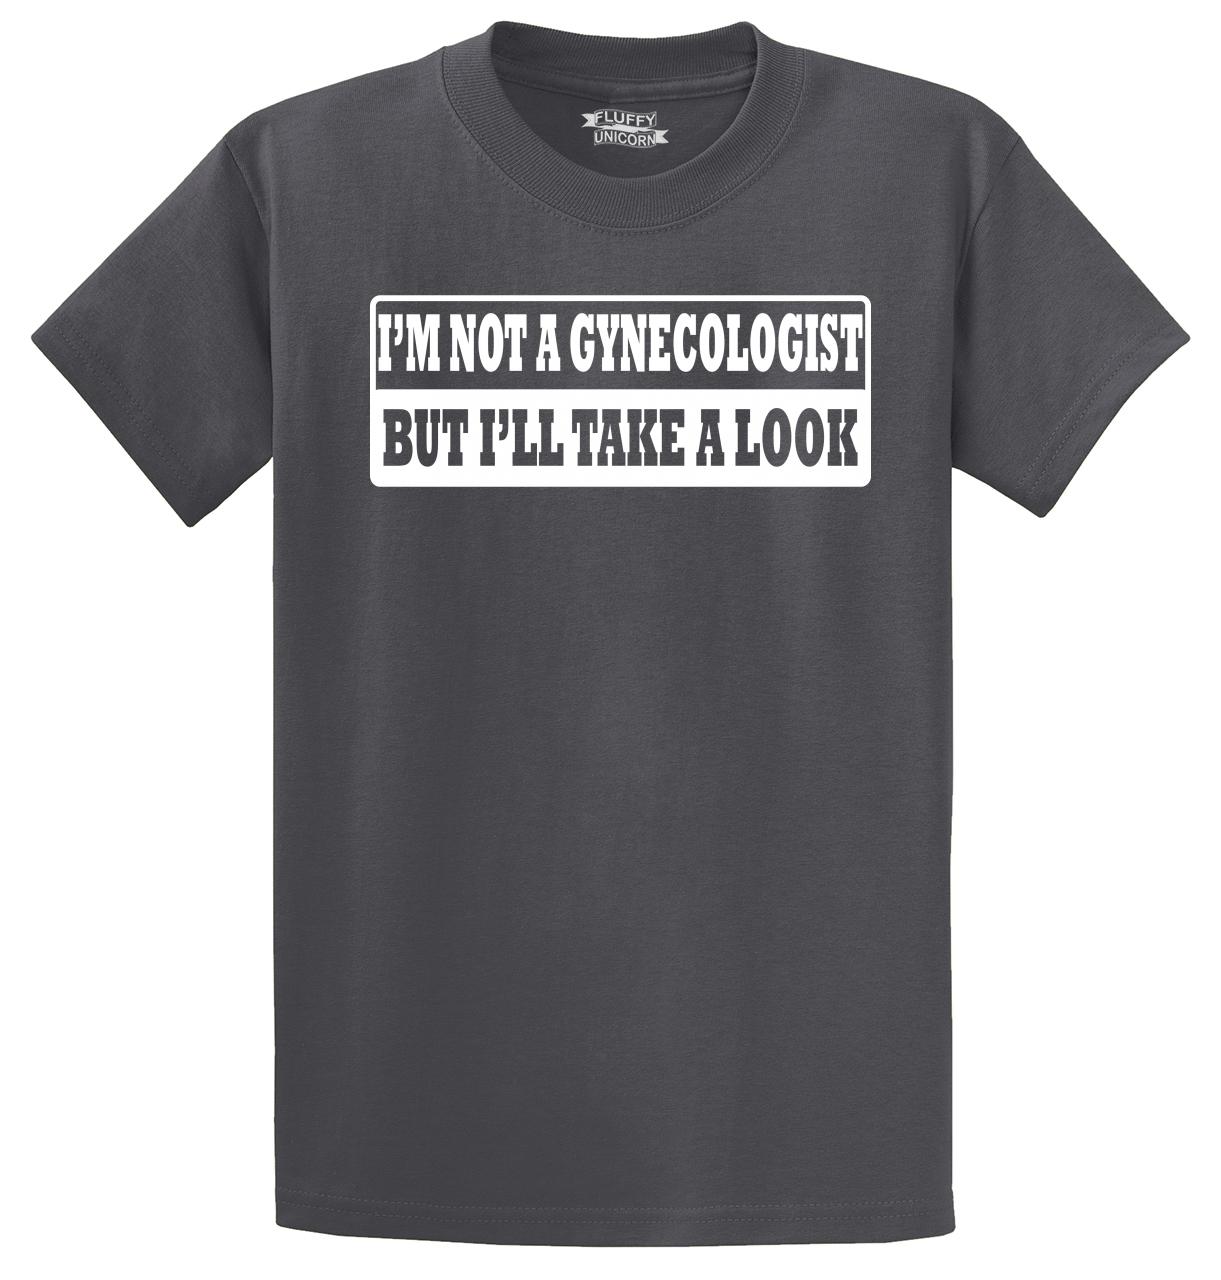 I'M NOT A GYNECOLOGIST BUT I'LL TAKE A LOOK doctor OBGYN black T-shirt S-5XL